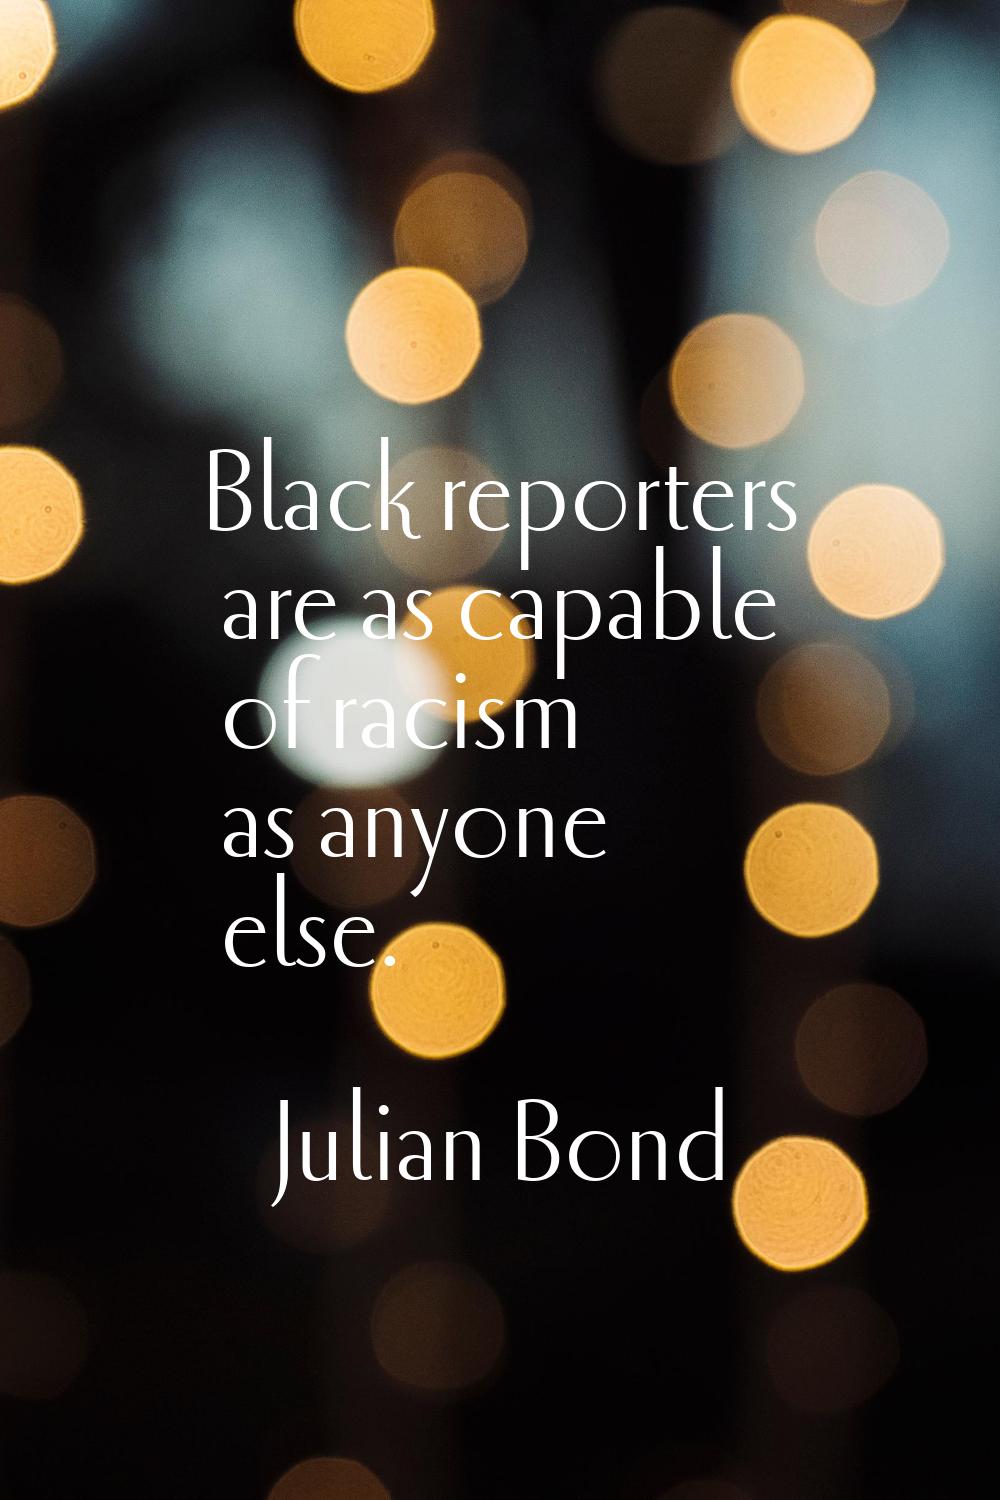 Black reporters are as capable of racism as anyone else.